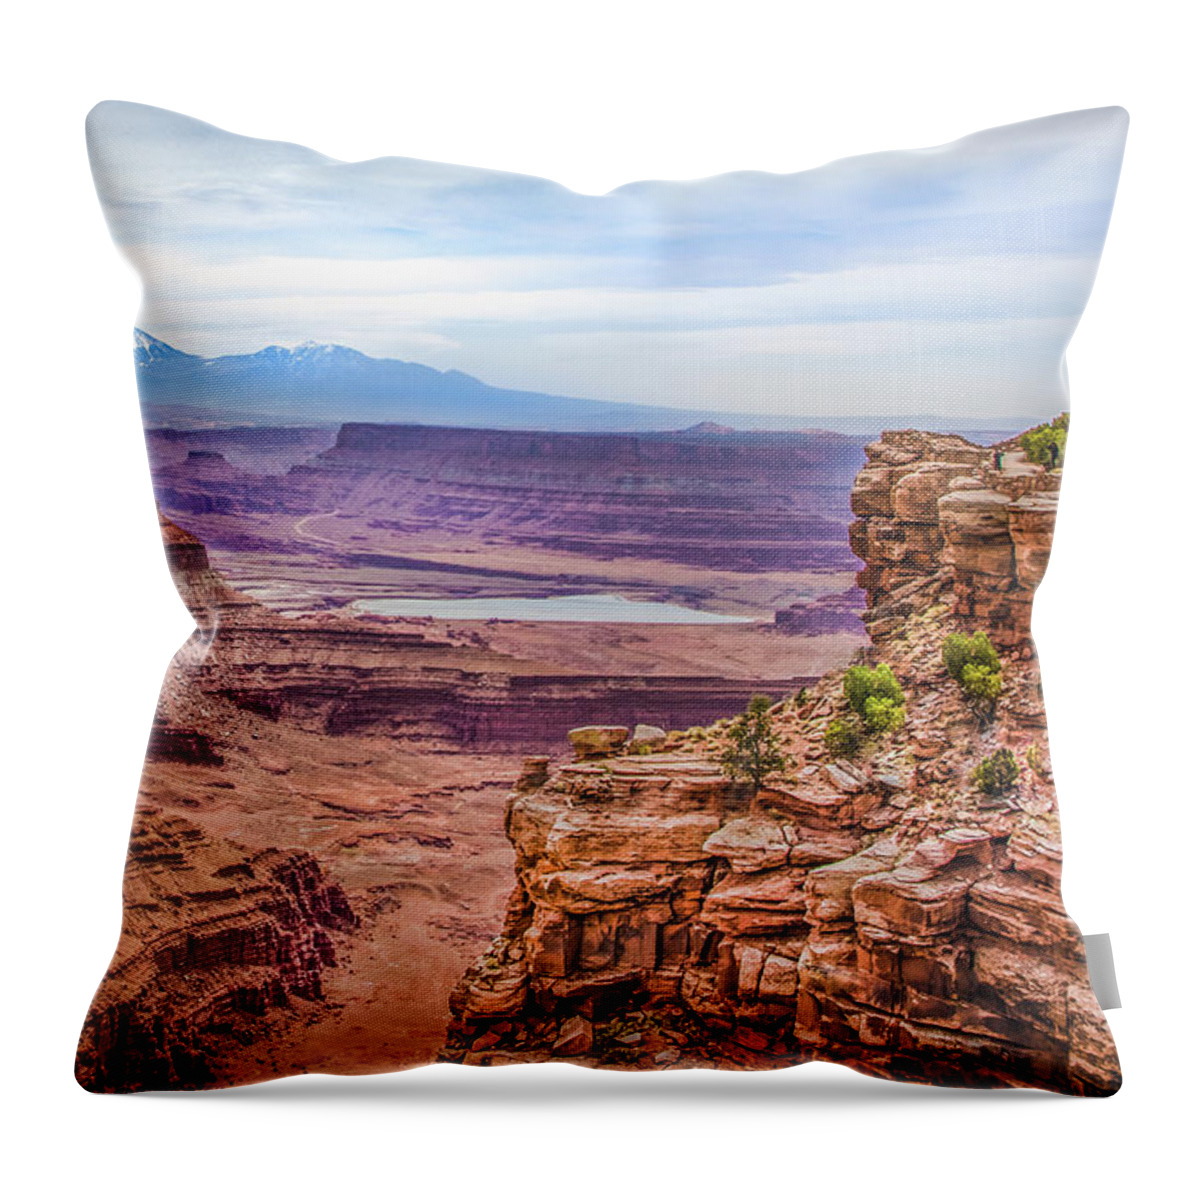 Utah Throw Pillow featuring the photograph Canyon Landscape by James Woody